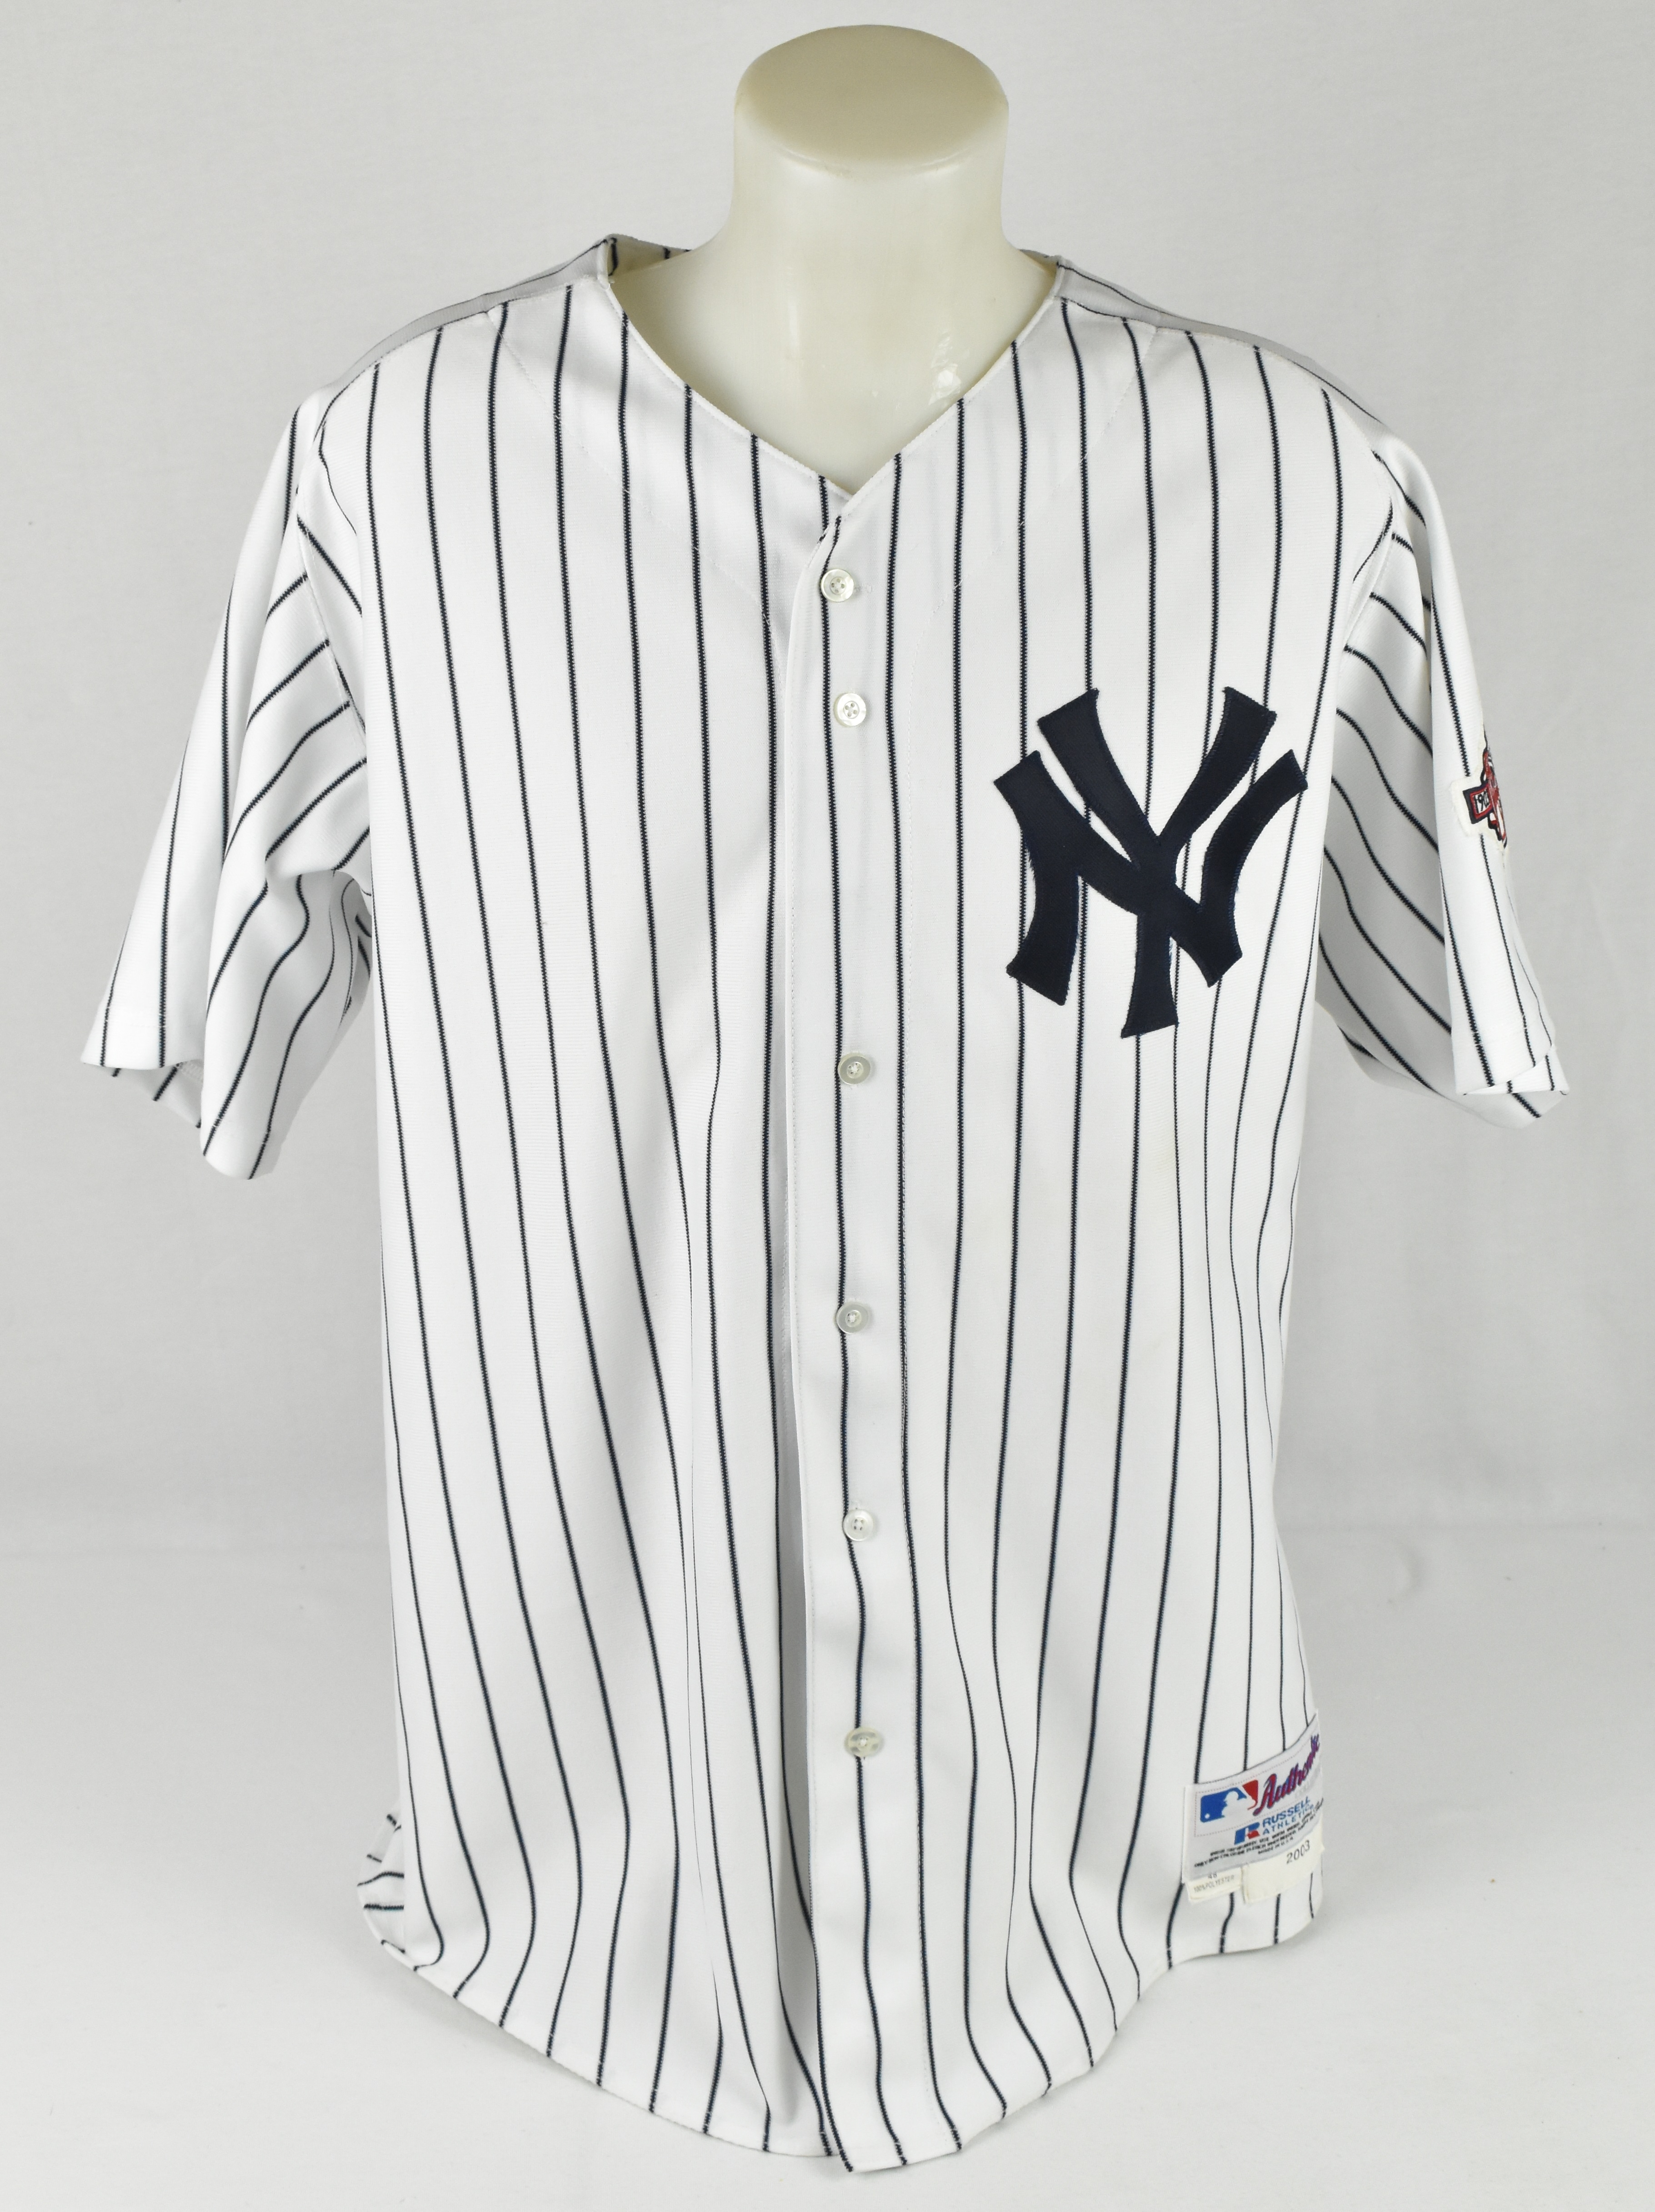 Derek Jeter 2003 Game-Used Yankees Jersey with 100th Anniversary Patch  (Steiner LOA)